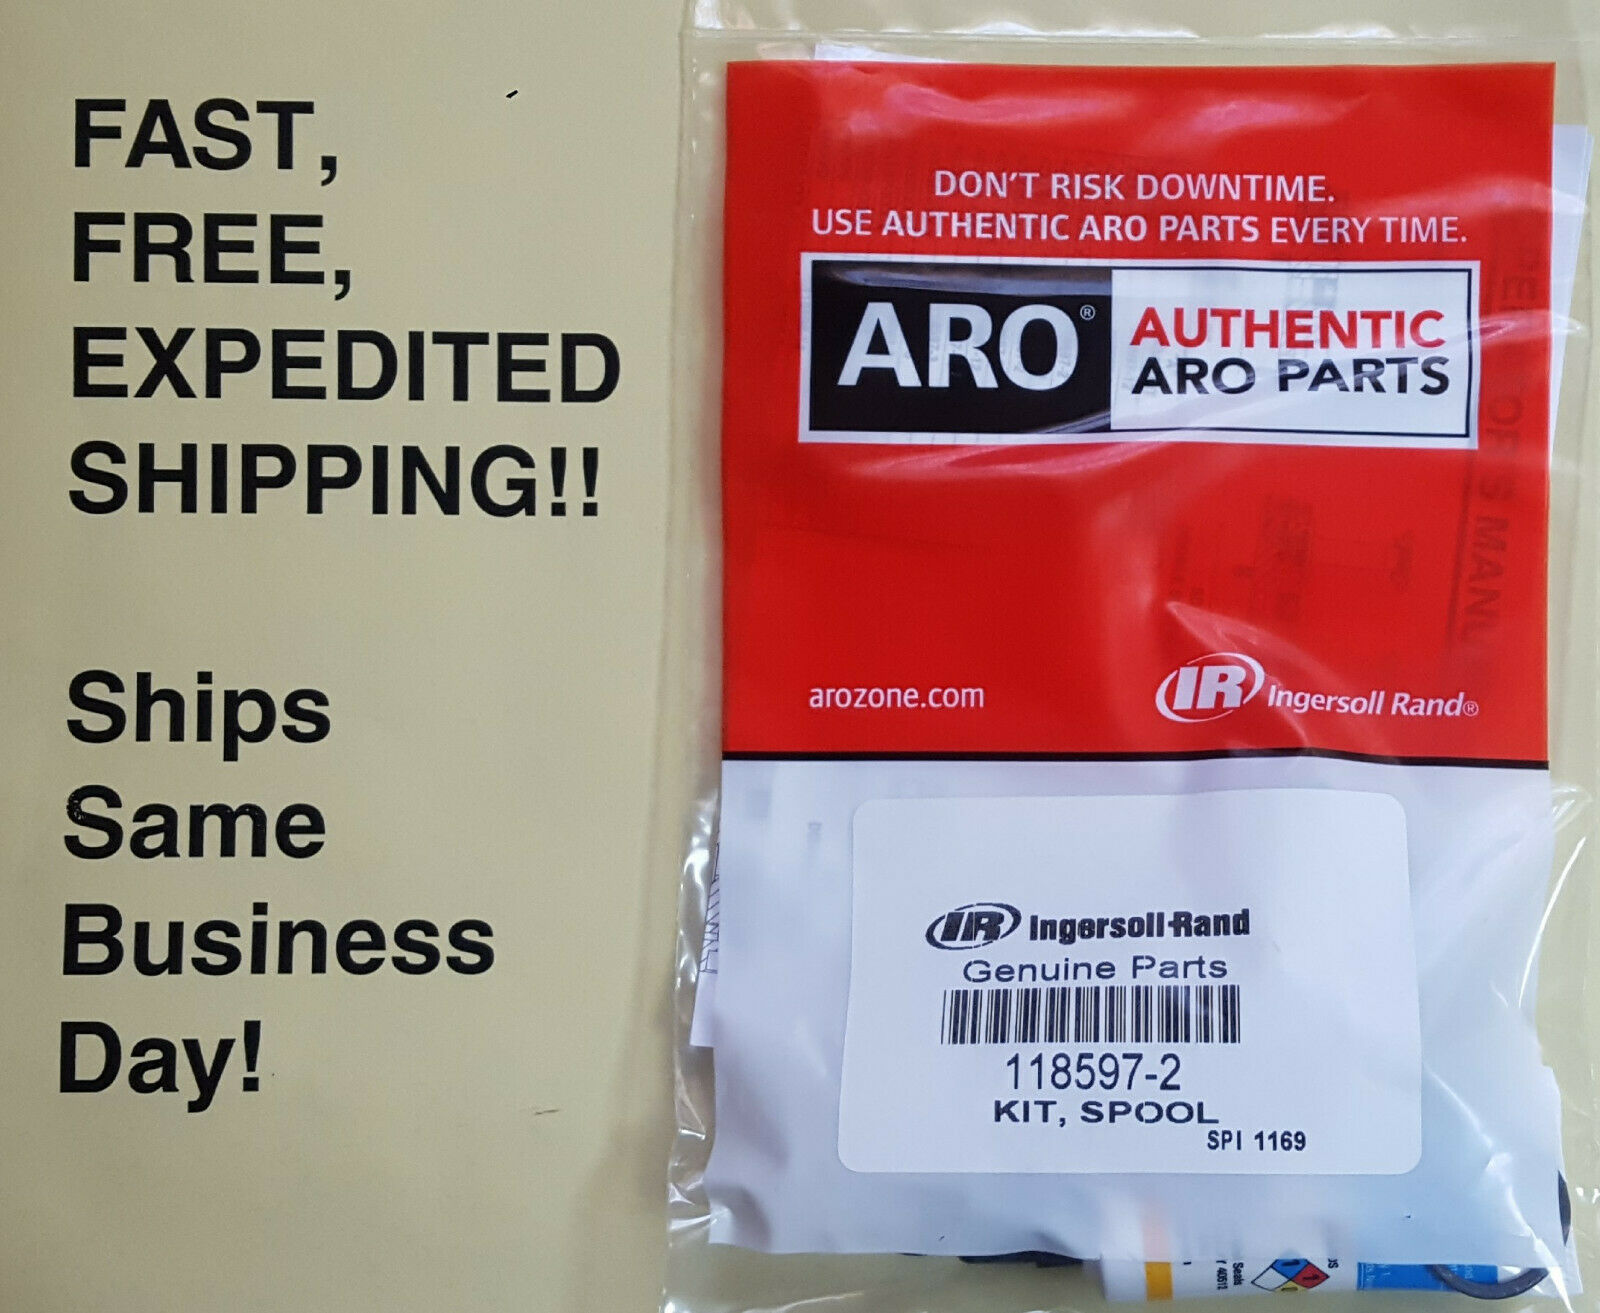 Aro 118597-2; Get It Fast - Free Same Day Shipping! Factory Fresh!